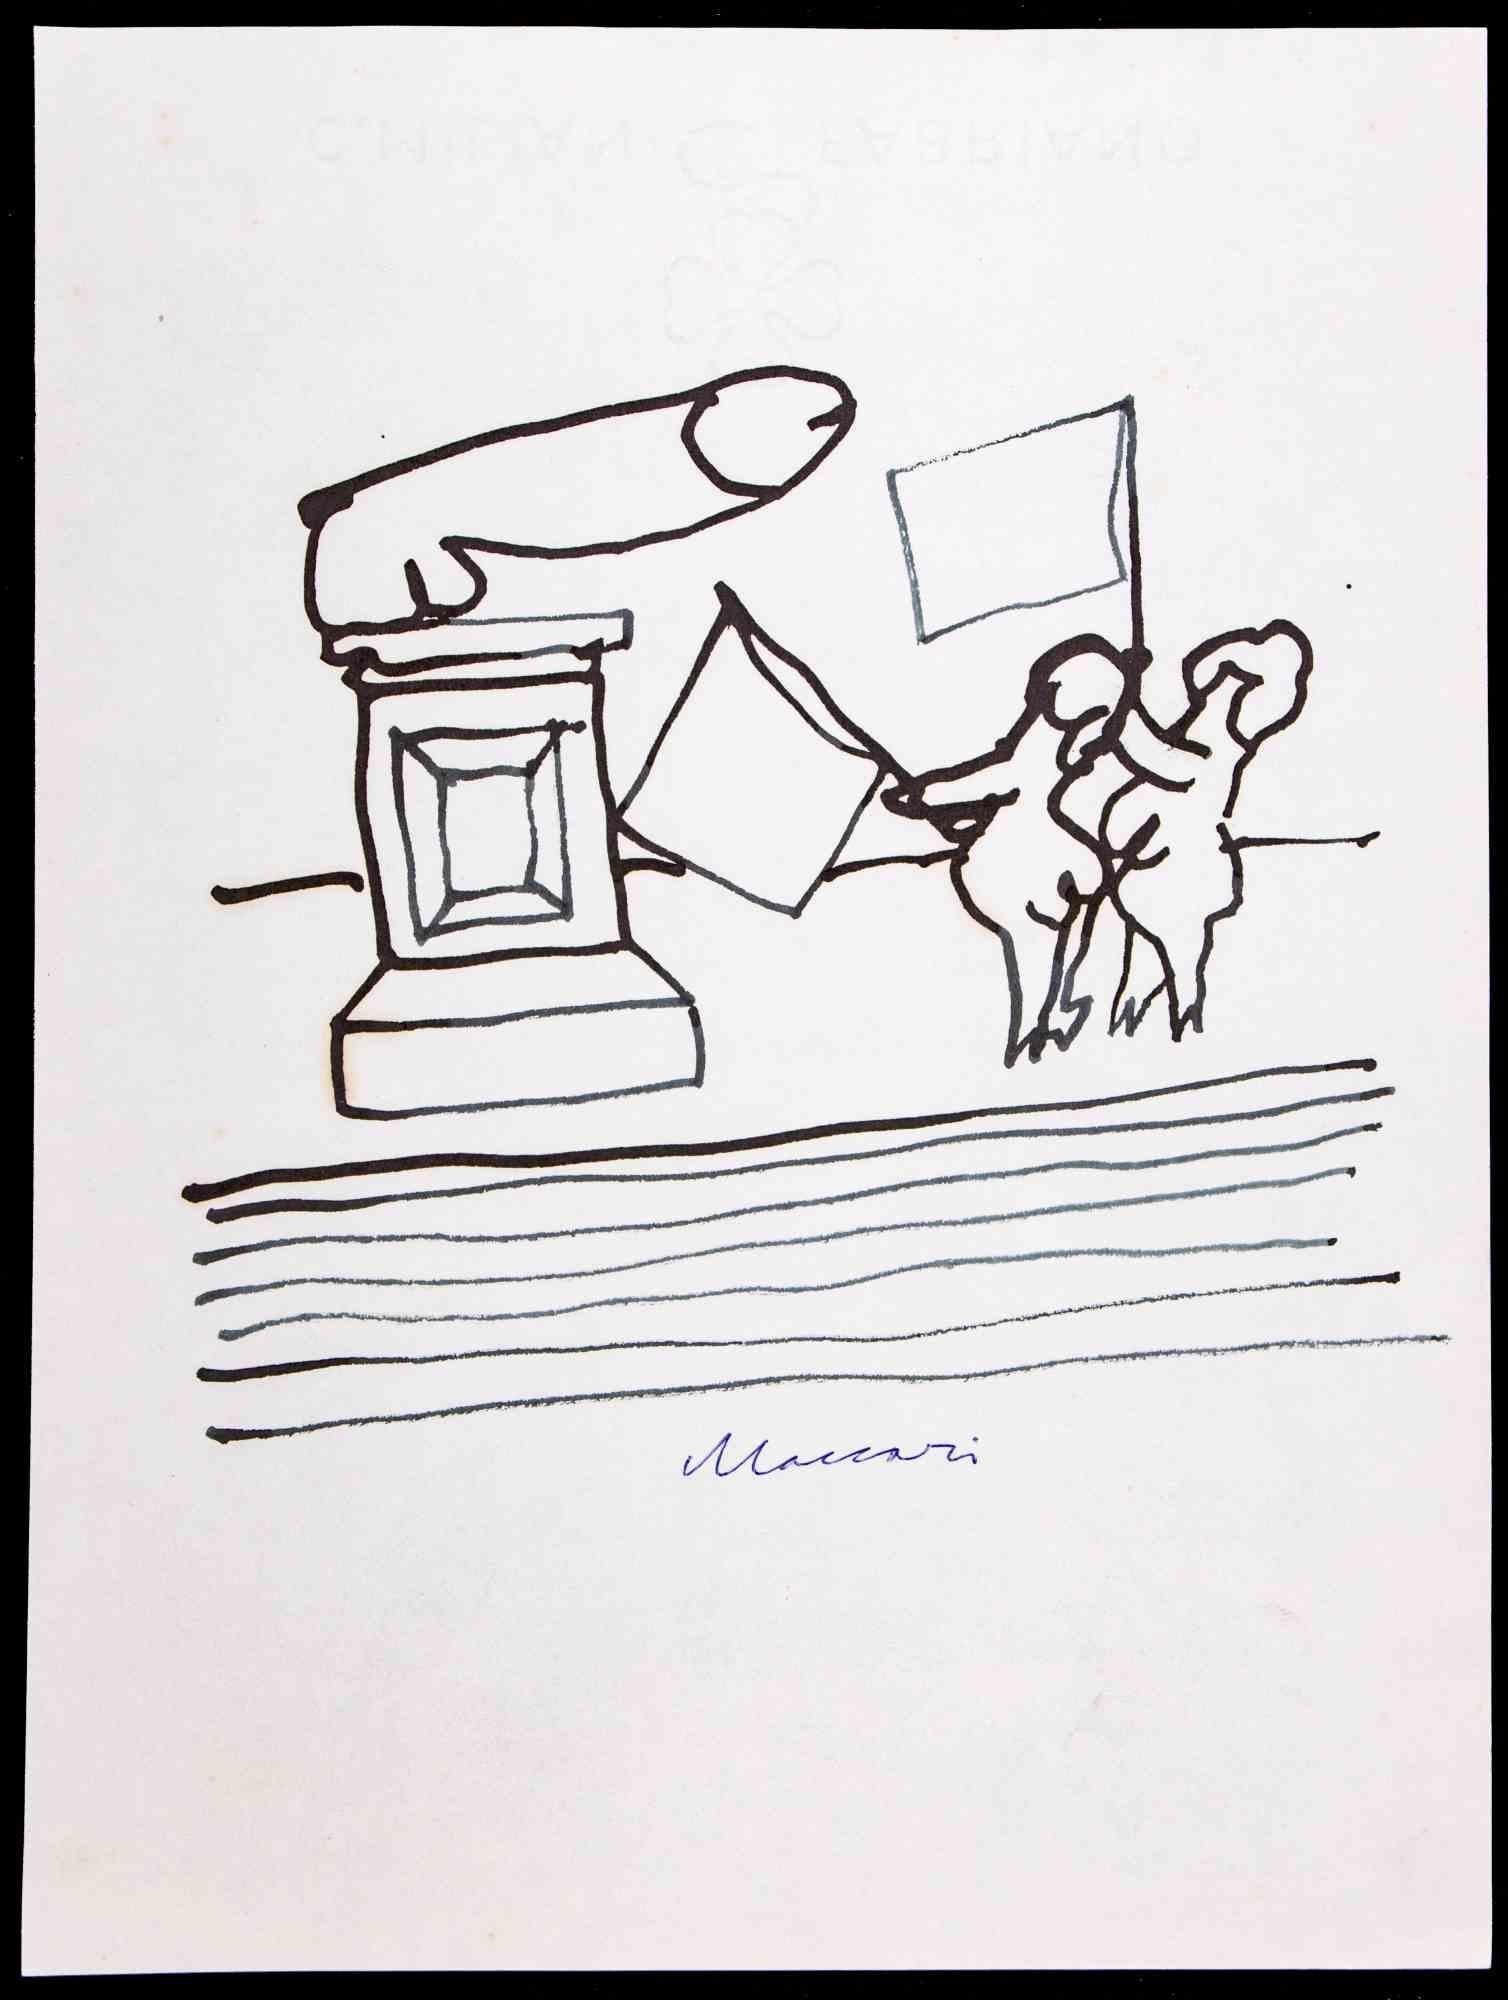 Monument is a china ink drawing realized by Mino Maccari (1924-1989) in 1970s.

Hand-signed on the lower margin.

Good condition on a white paper.

Mino Maccari (Siena, 1924-Rome, June 16, 1989) was an Italian writer, painter, engraver and